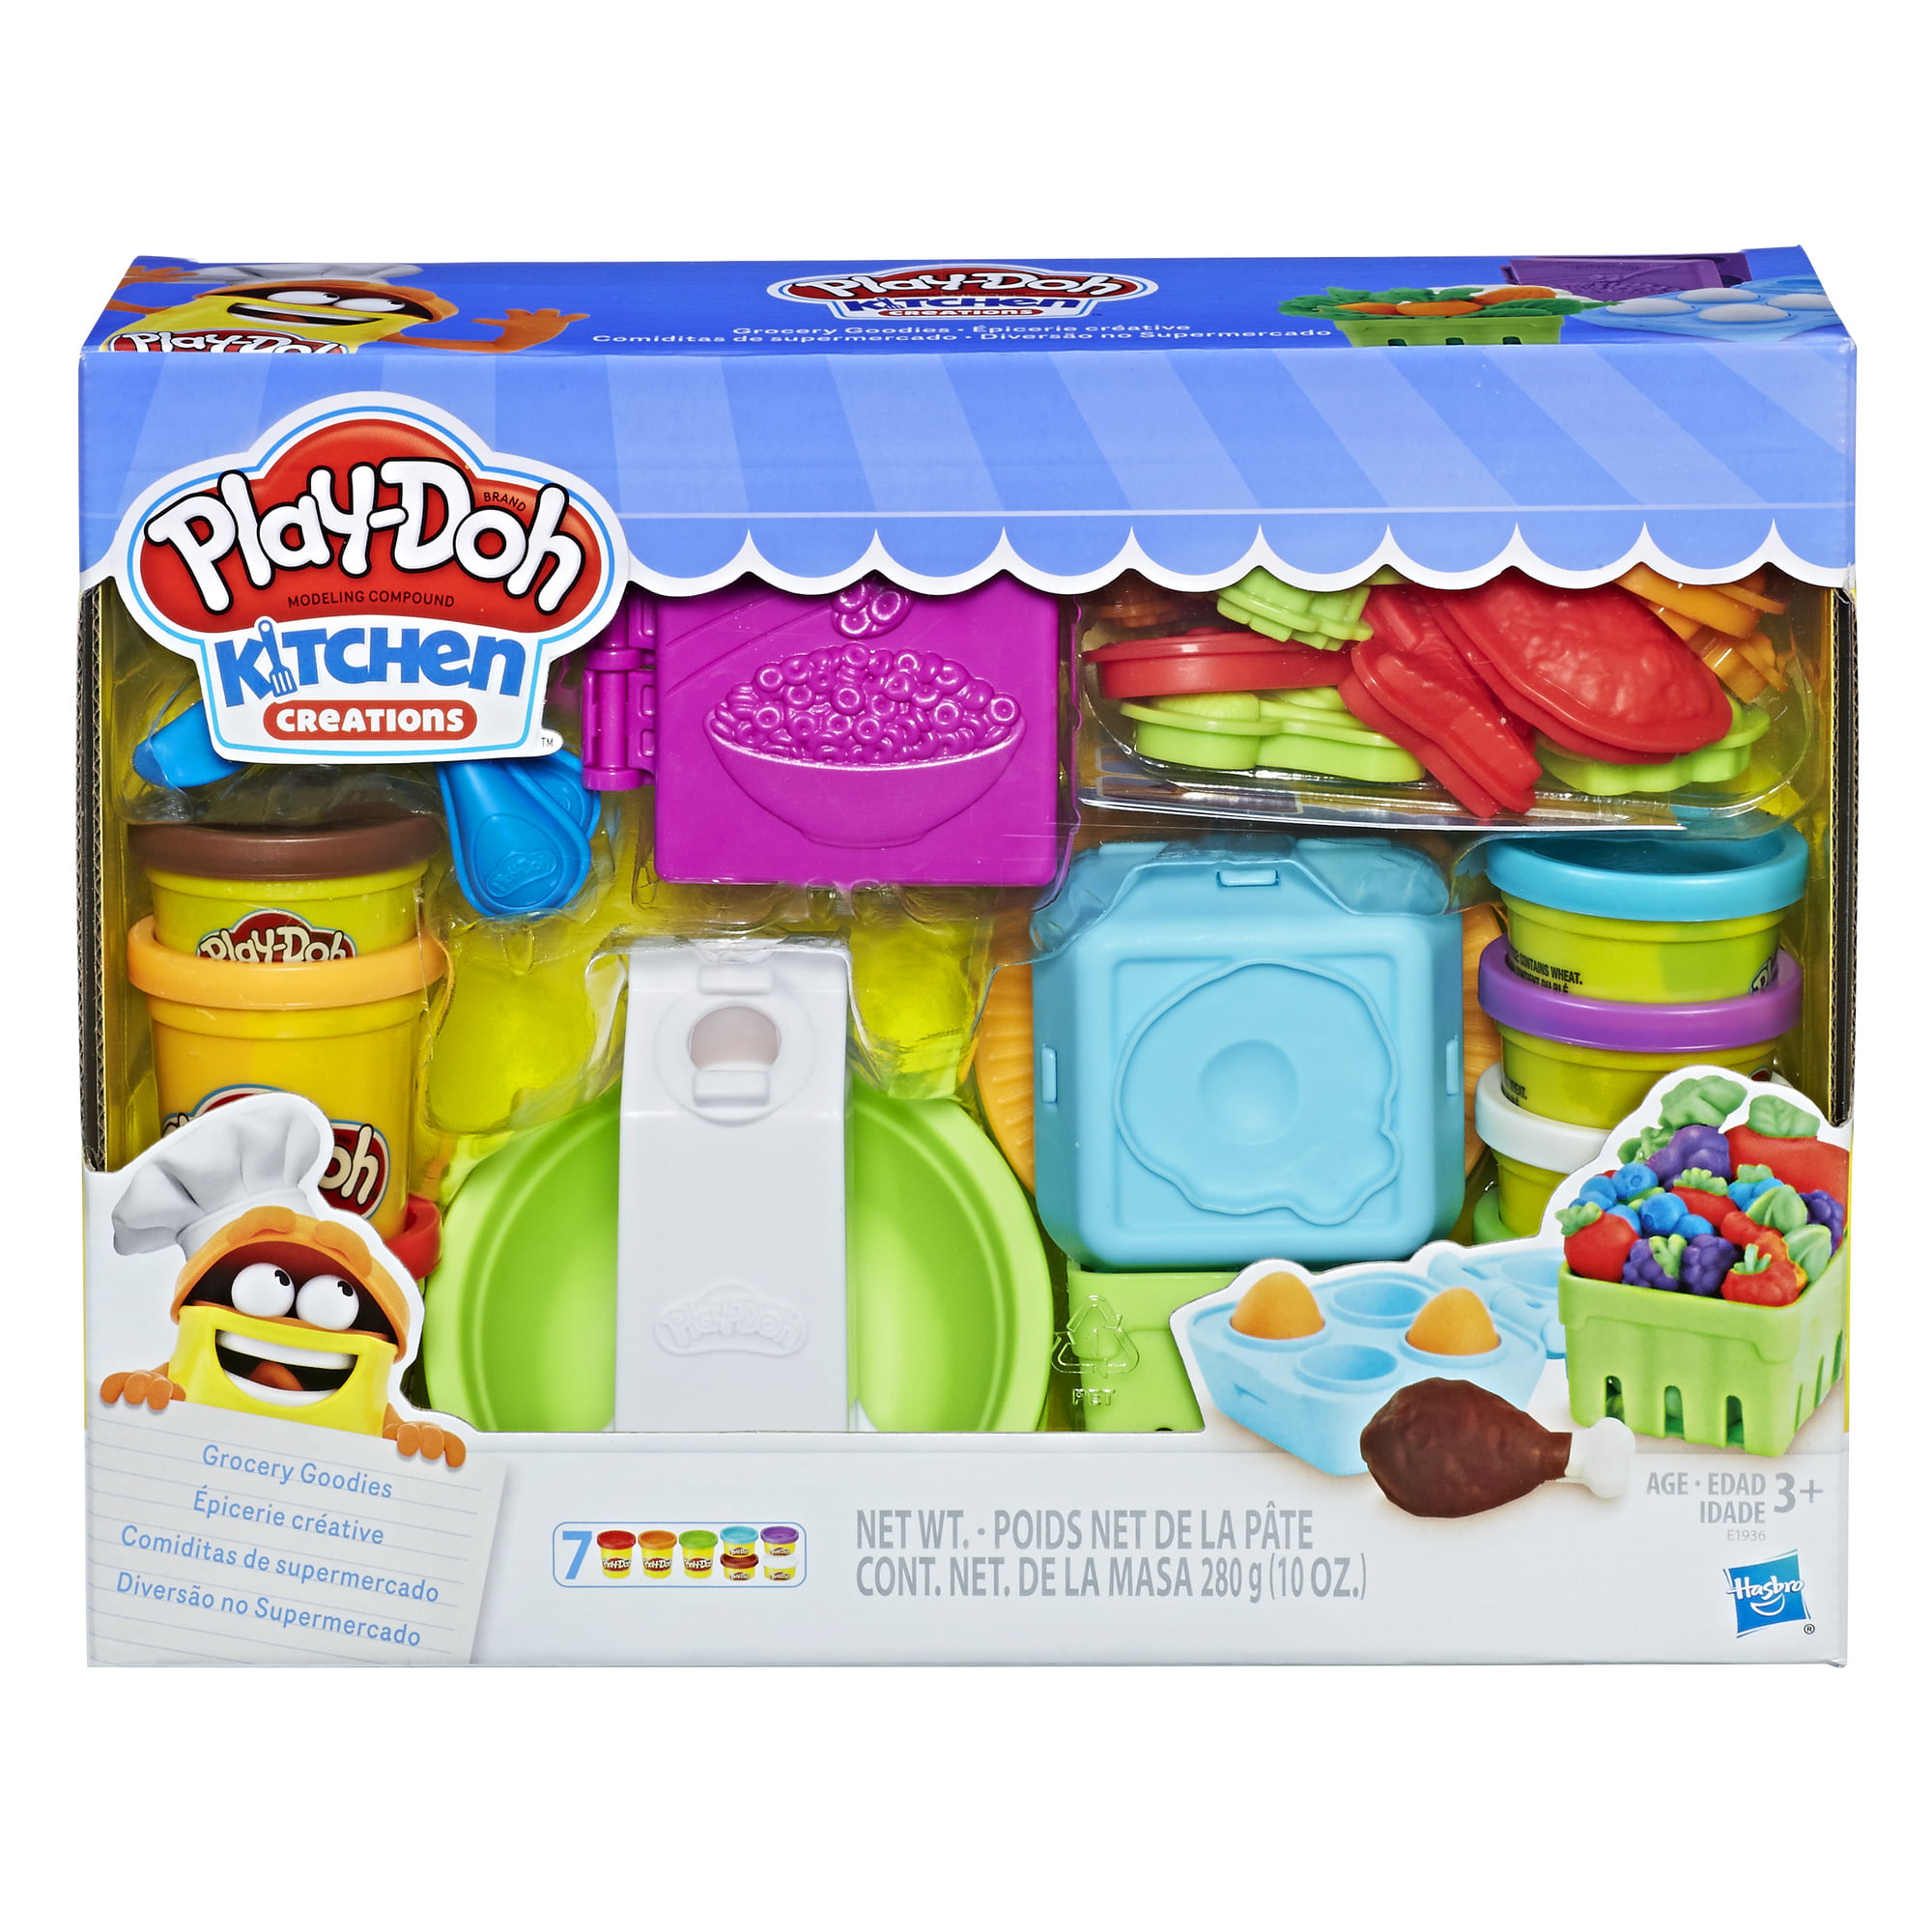  Play  Doh  Kitchen  Creations Grocery Goodies Food Set  with 7 